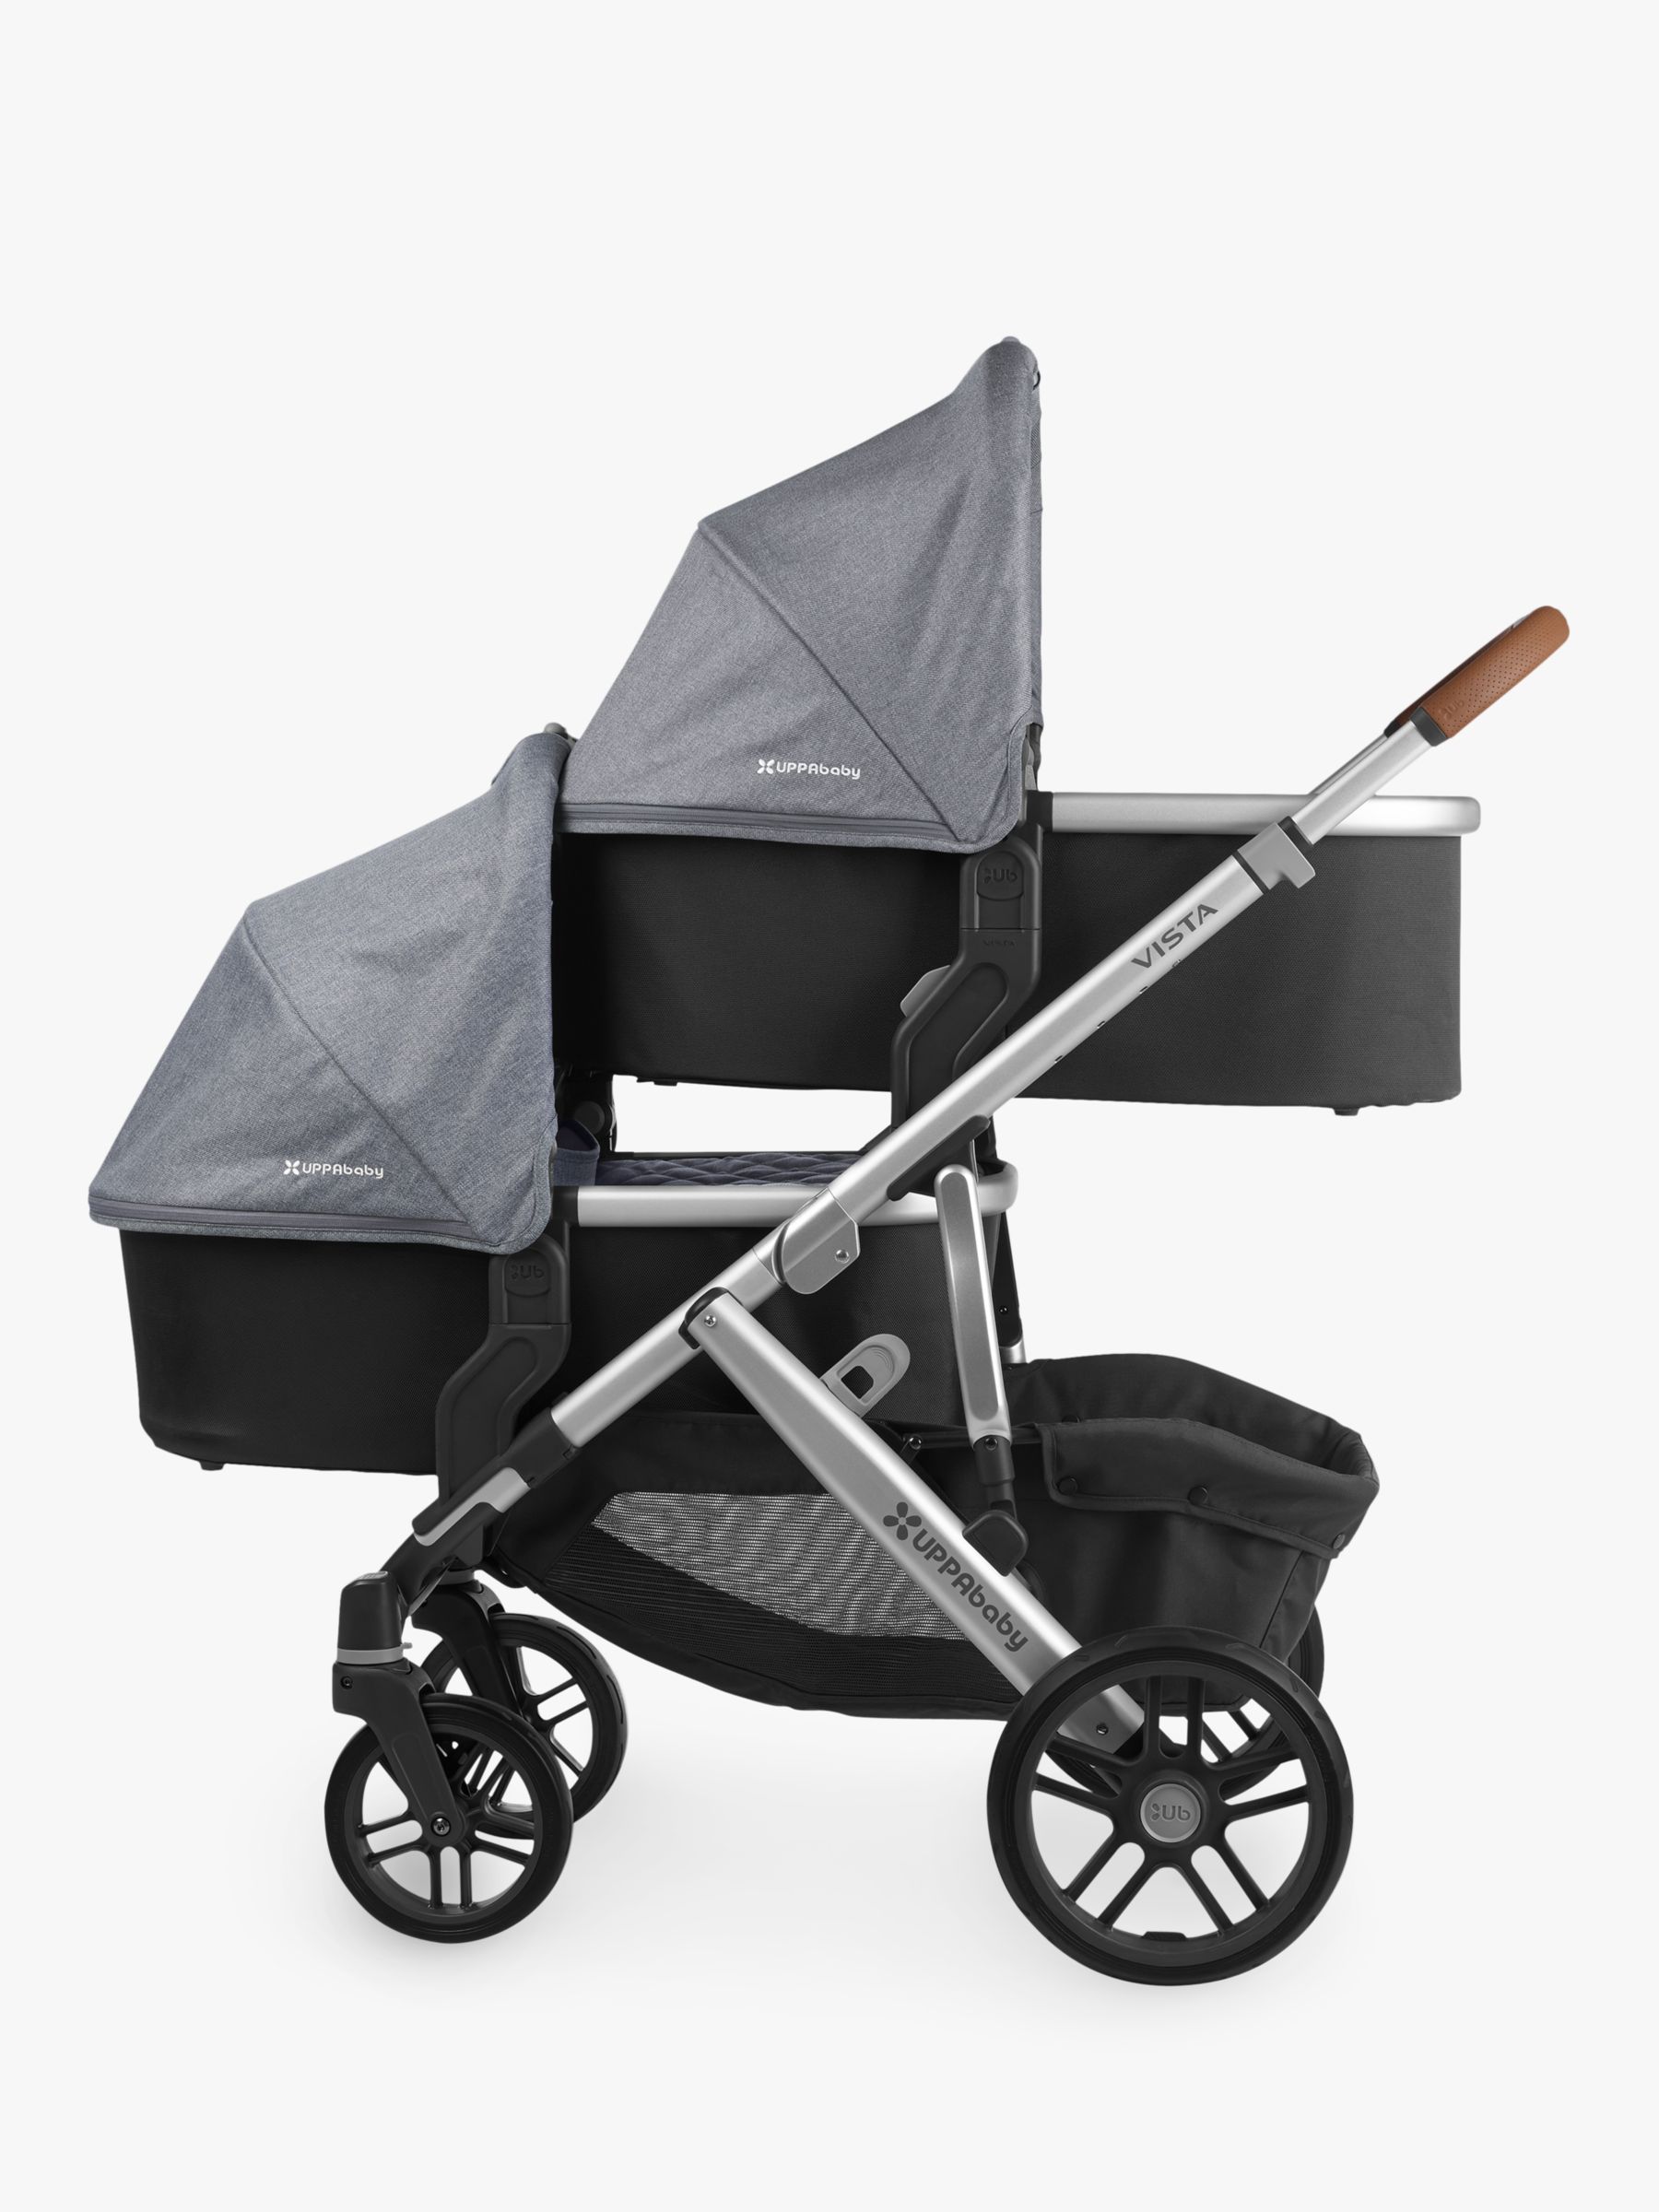 where can i buy uppababy stroller